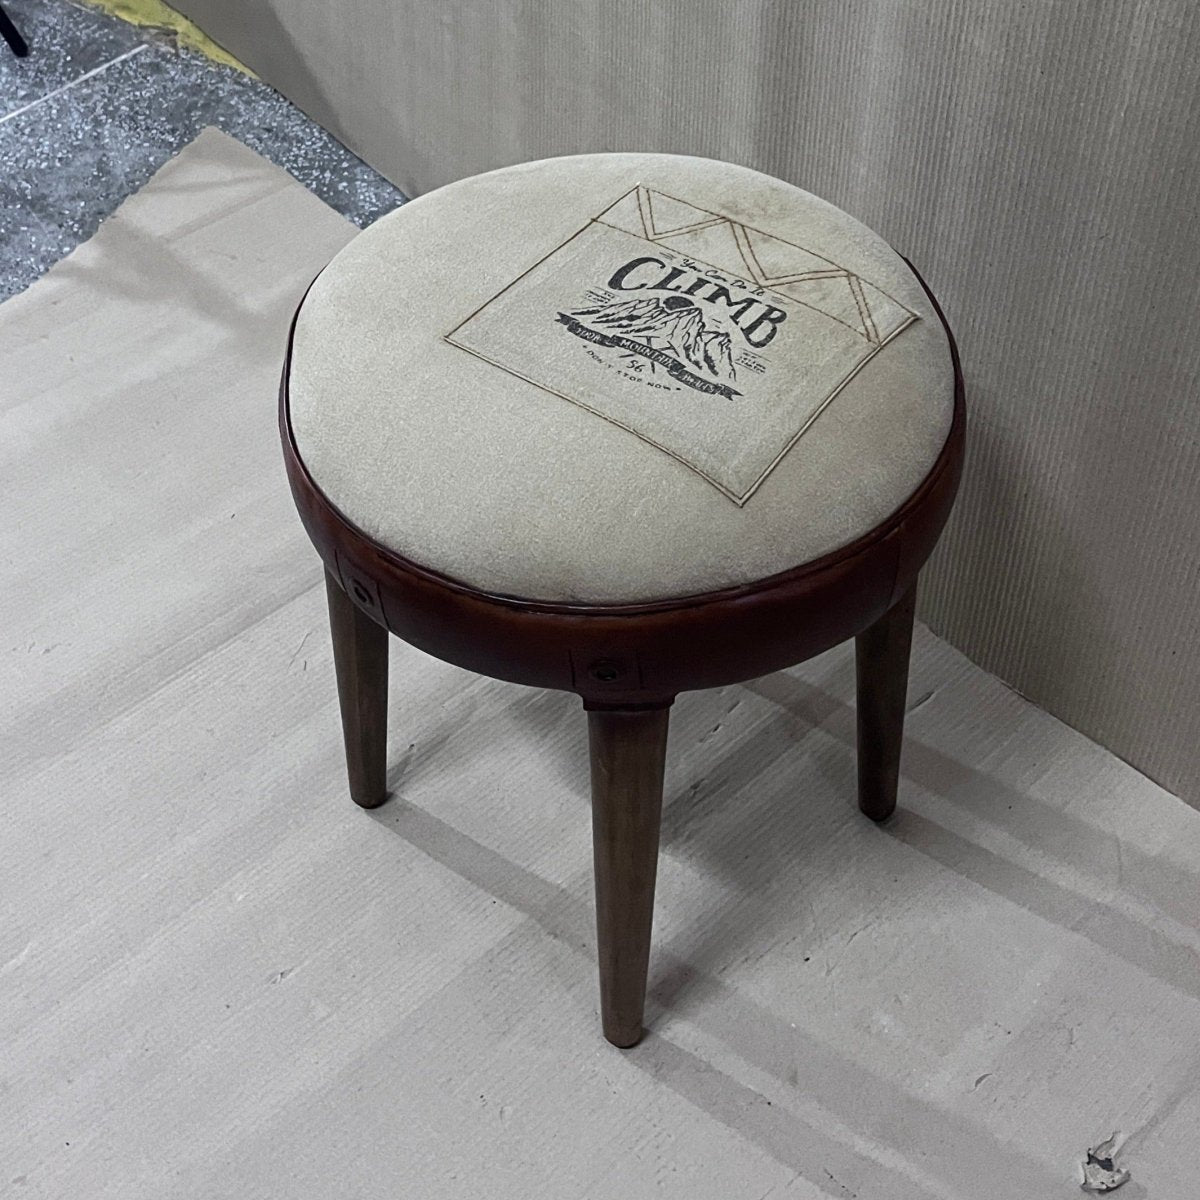 Climb Leather and canvas 4 leg stool - Rustic Furniture Outlet